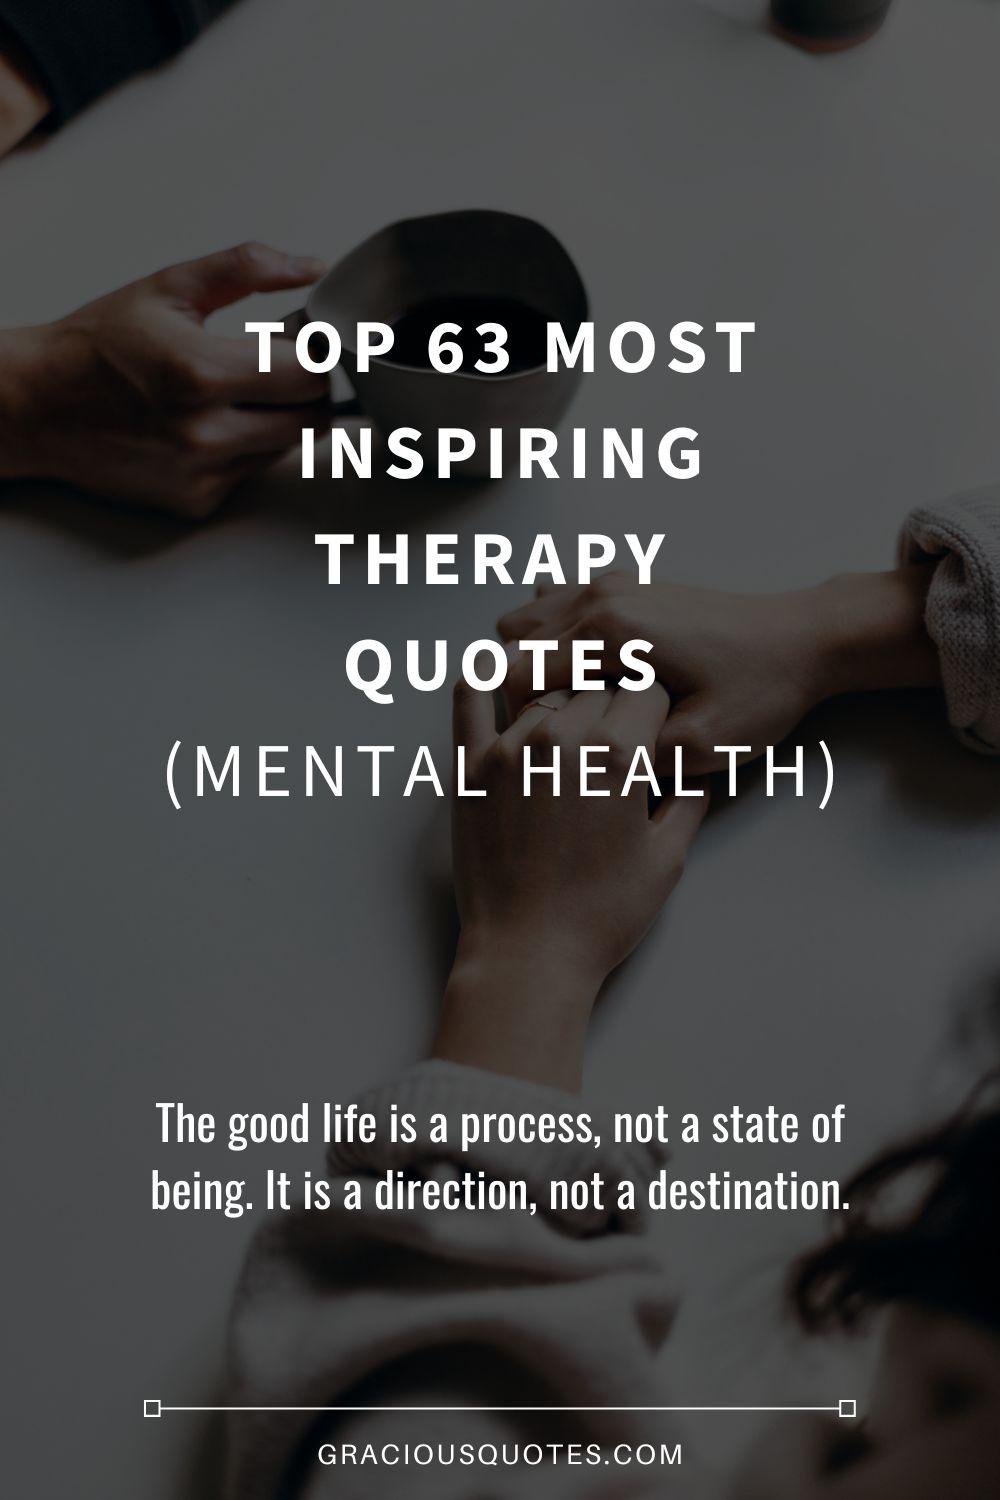 Top 63 Most Inspiring Therapy Quotes (MENTAL HEALTH) - Gracious Quotes